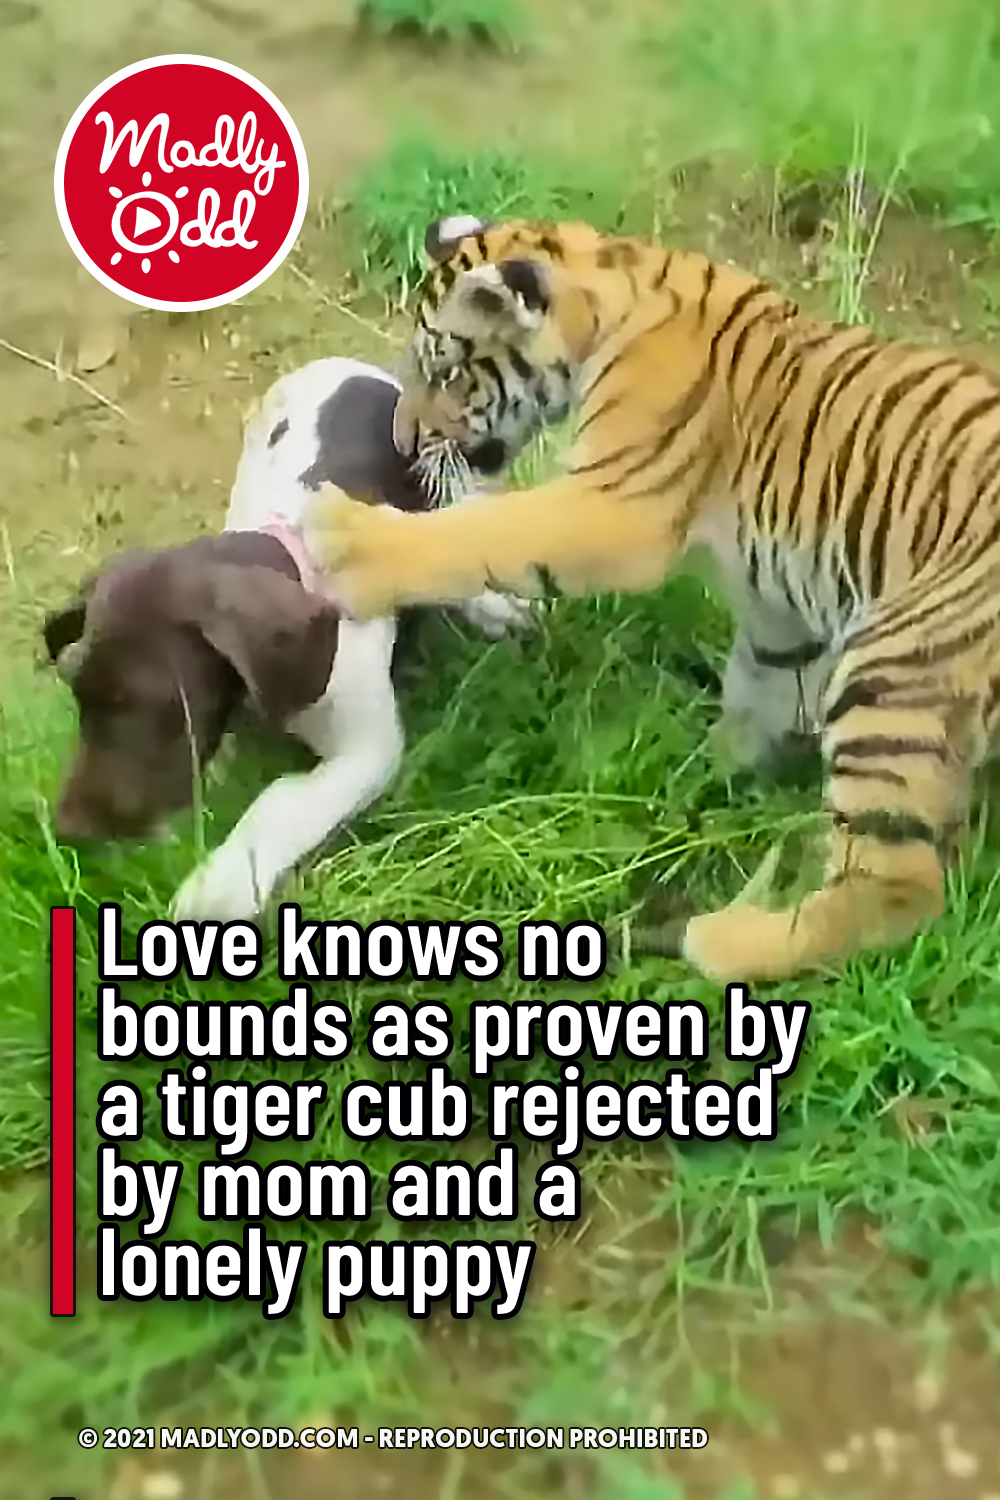 Love knows no bounds as proven by a tiger cub rejected by mom and a lonely puppy